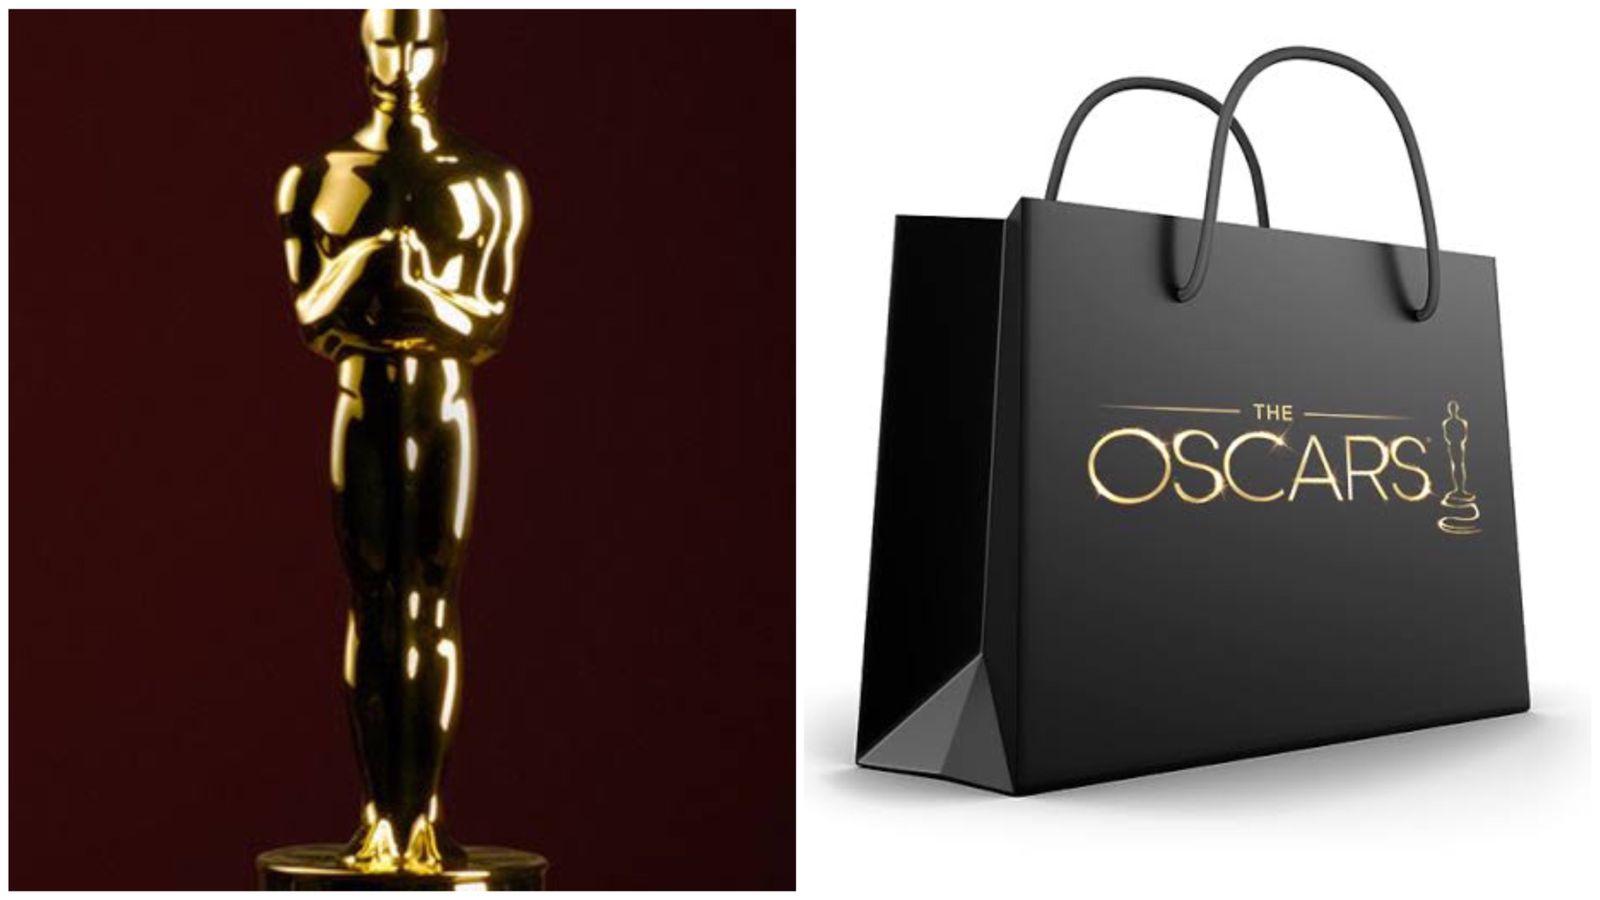 make it flat financial Thought What is in the gift bag of the Oscar nominees - Infobae